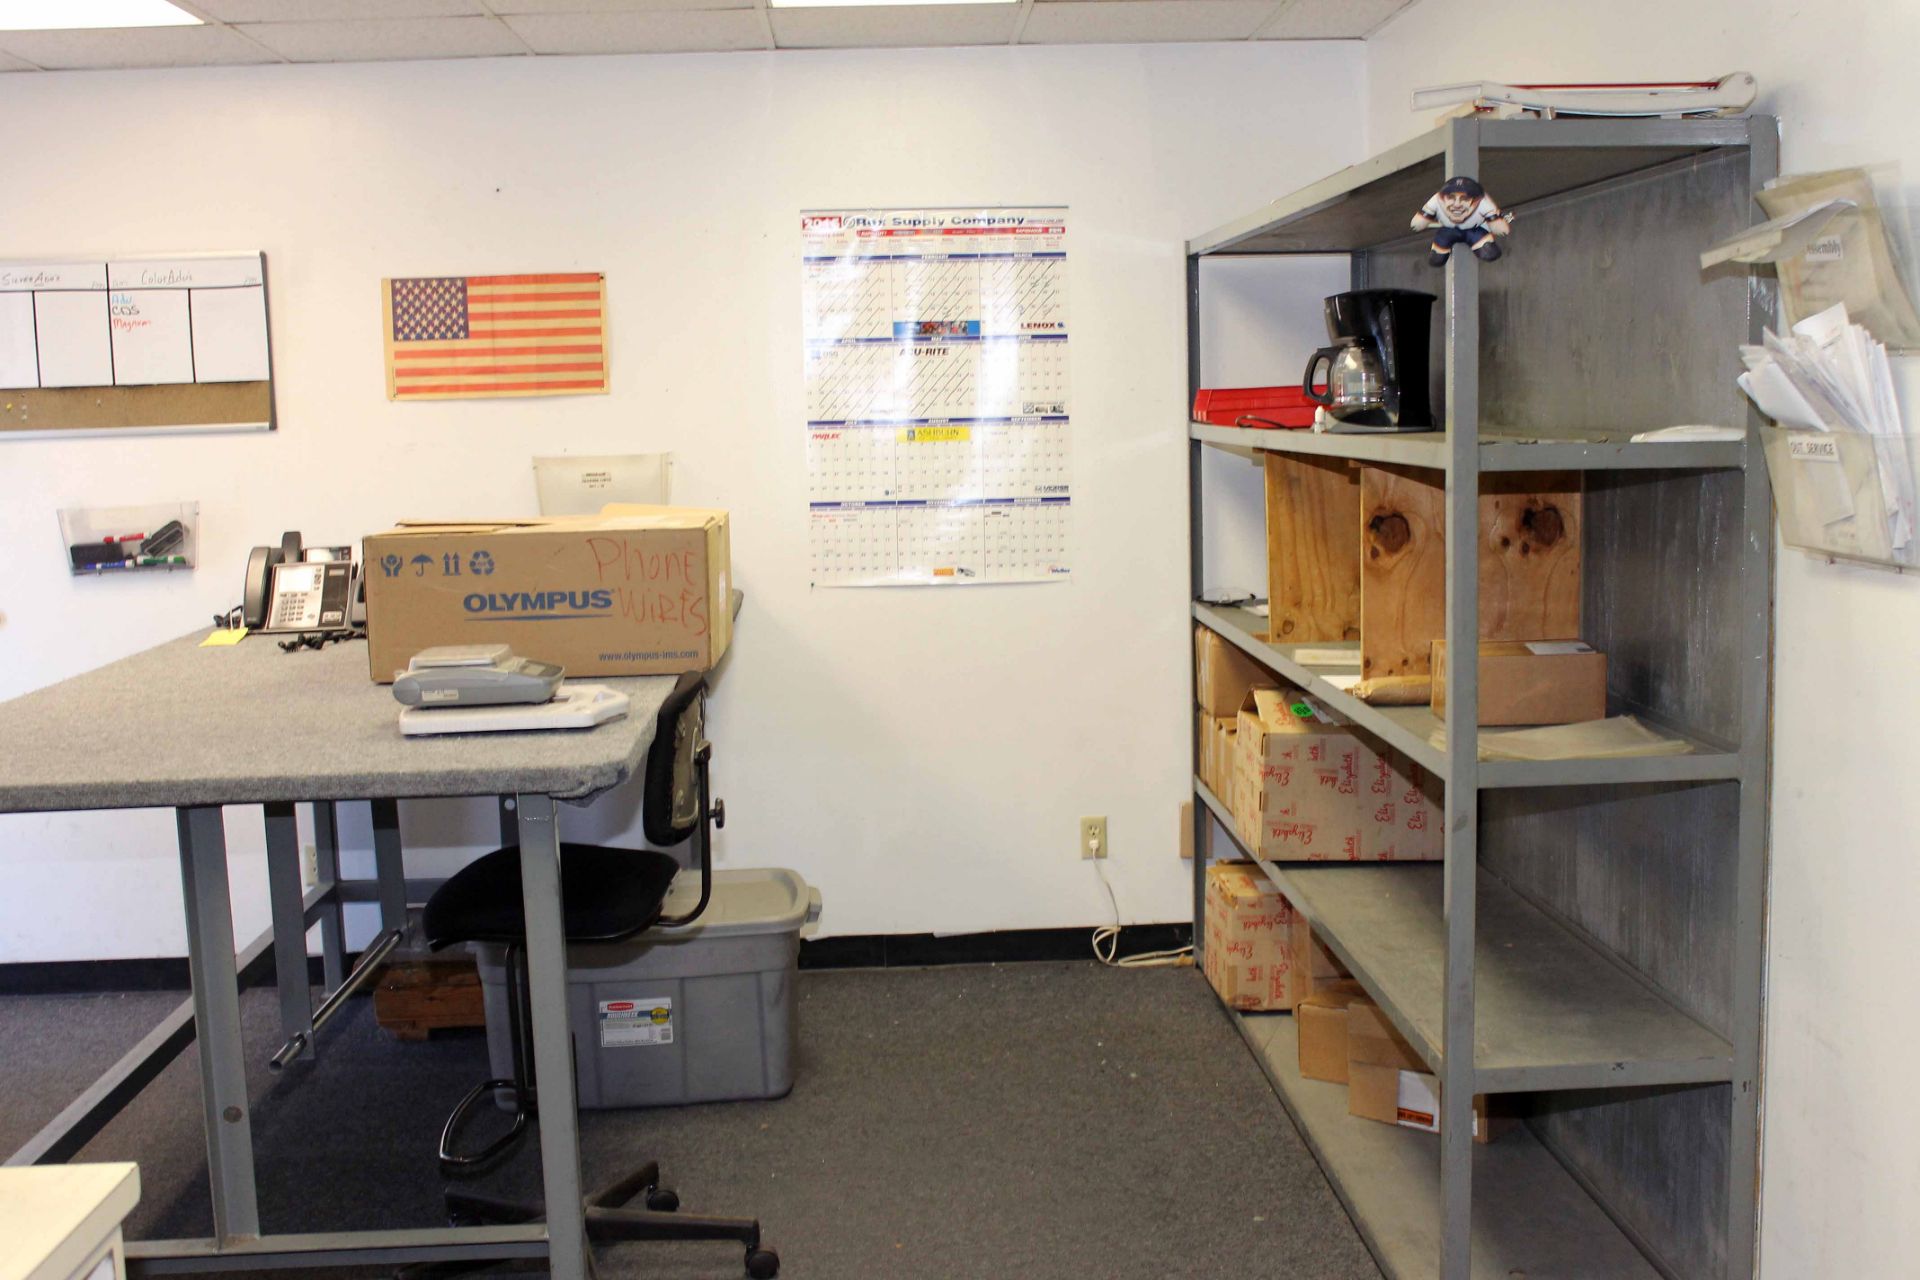 LOT REMAINING CONTENTS OF SHIPPING ROOM: 4' x 8' steel table, steel shelving units, packing